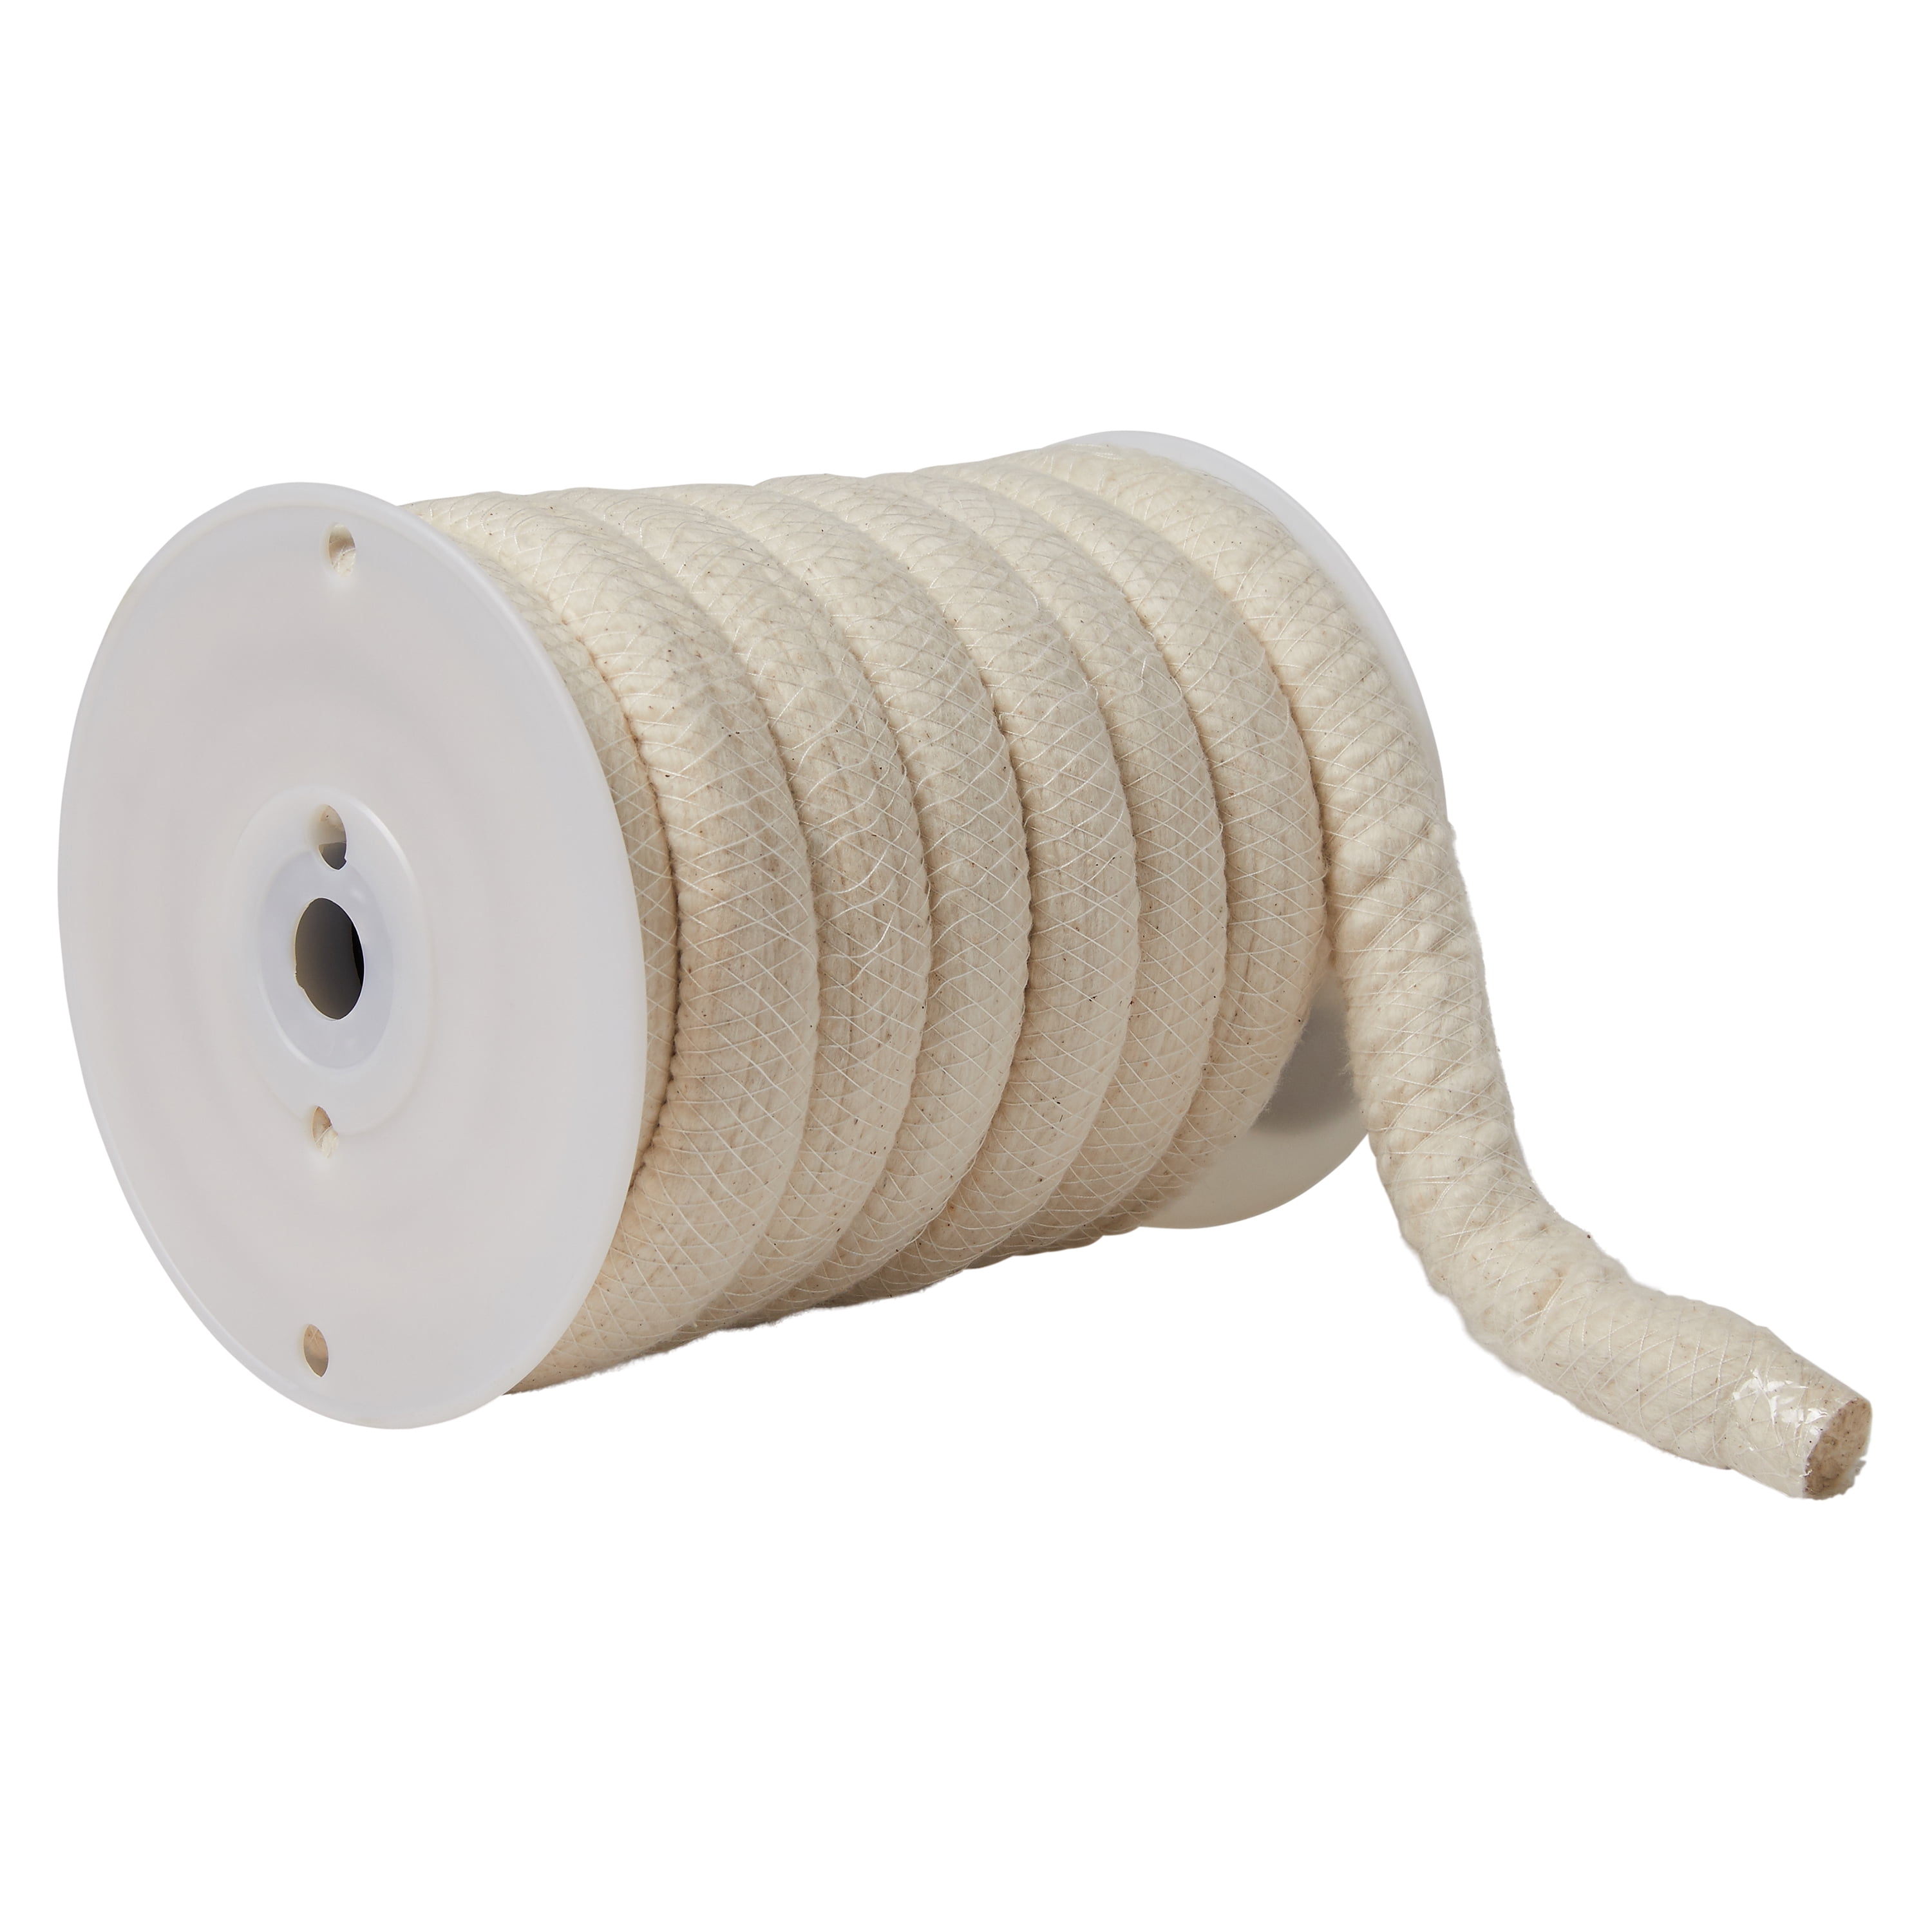 20 mt length of 4 mm UNBLEACHED COTTON  INNER PIPING CORD UPHOLSTERY-MACRAME 